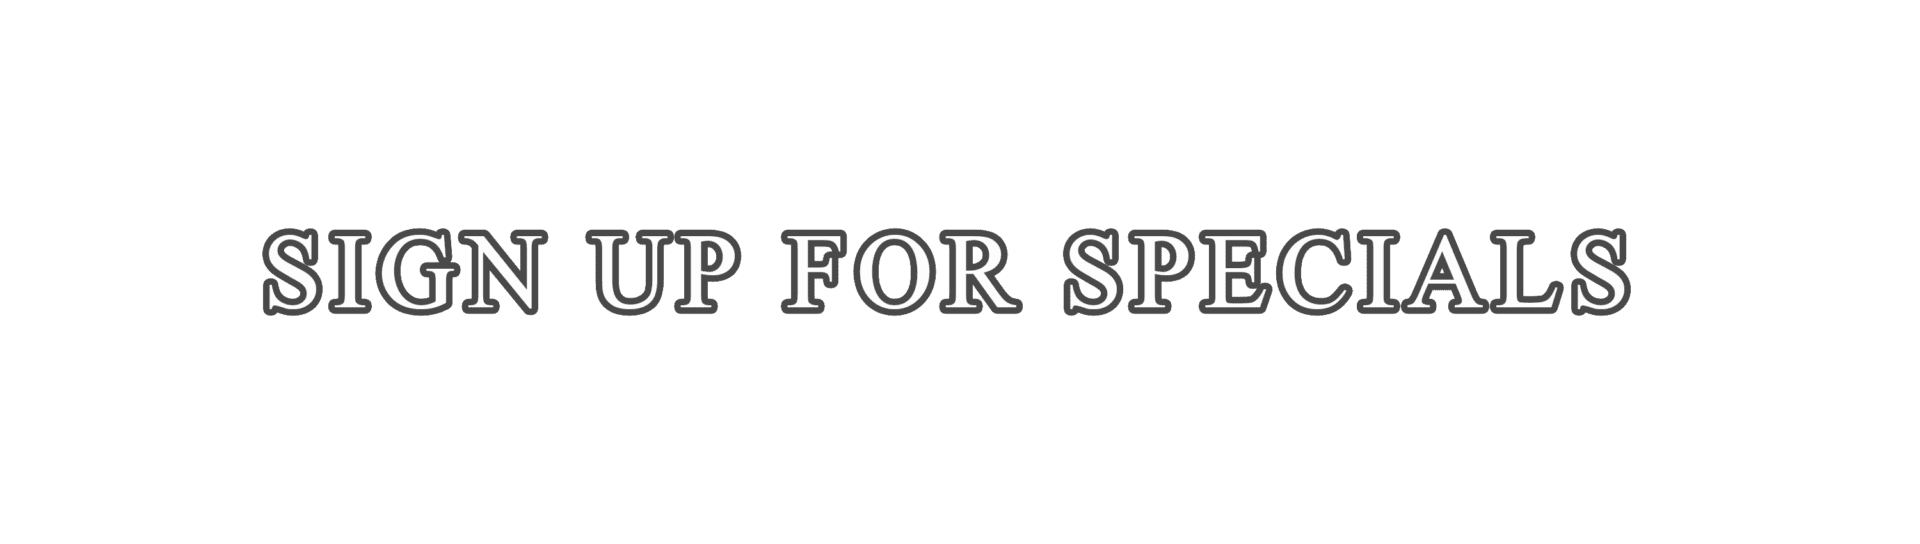 SIGN UP FOR SPECIALS png